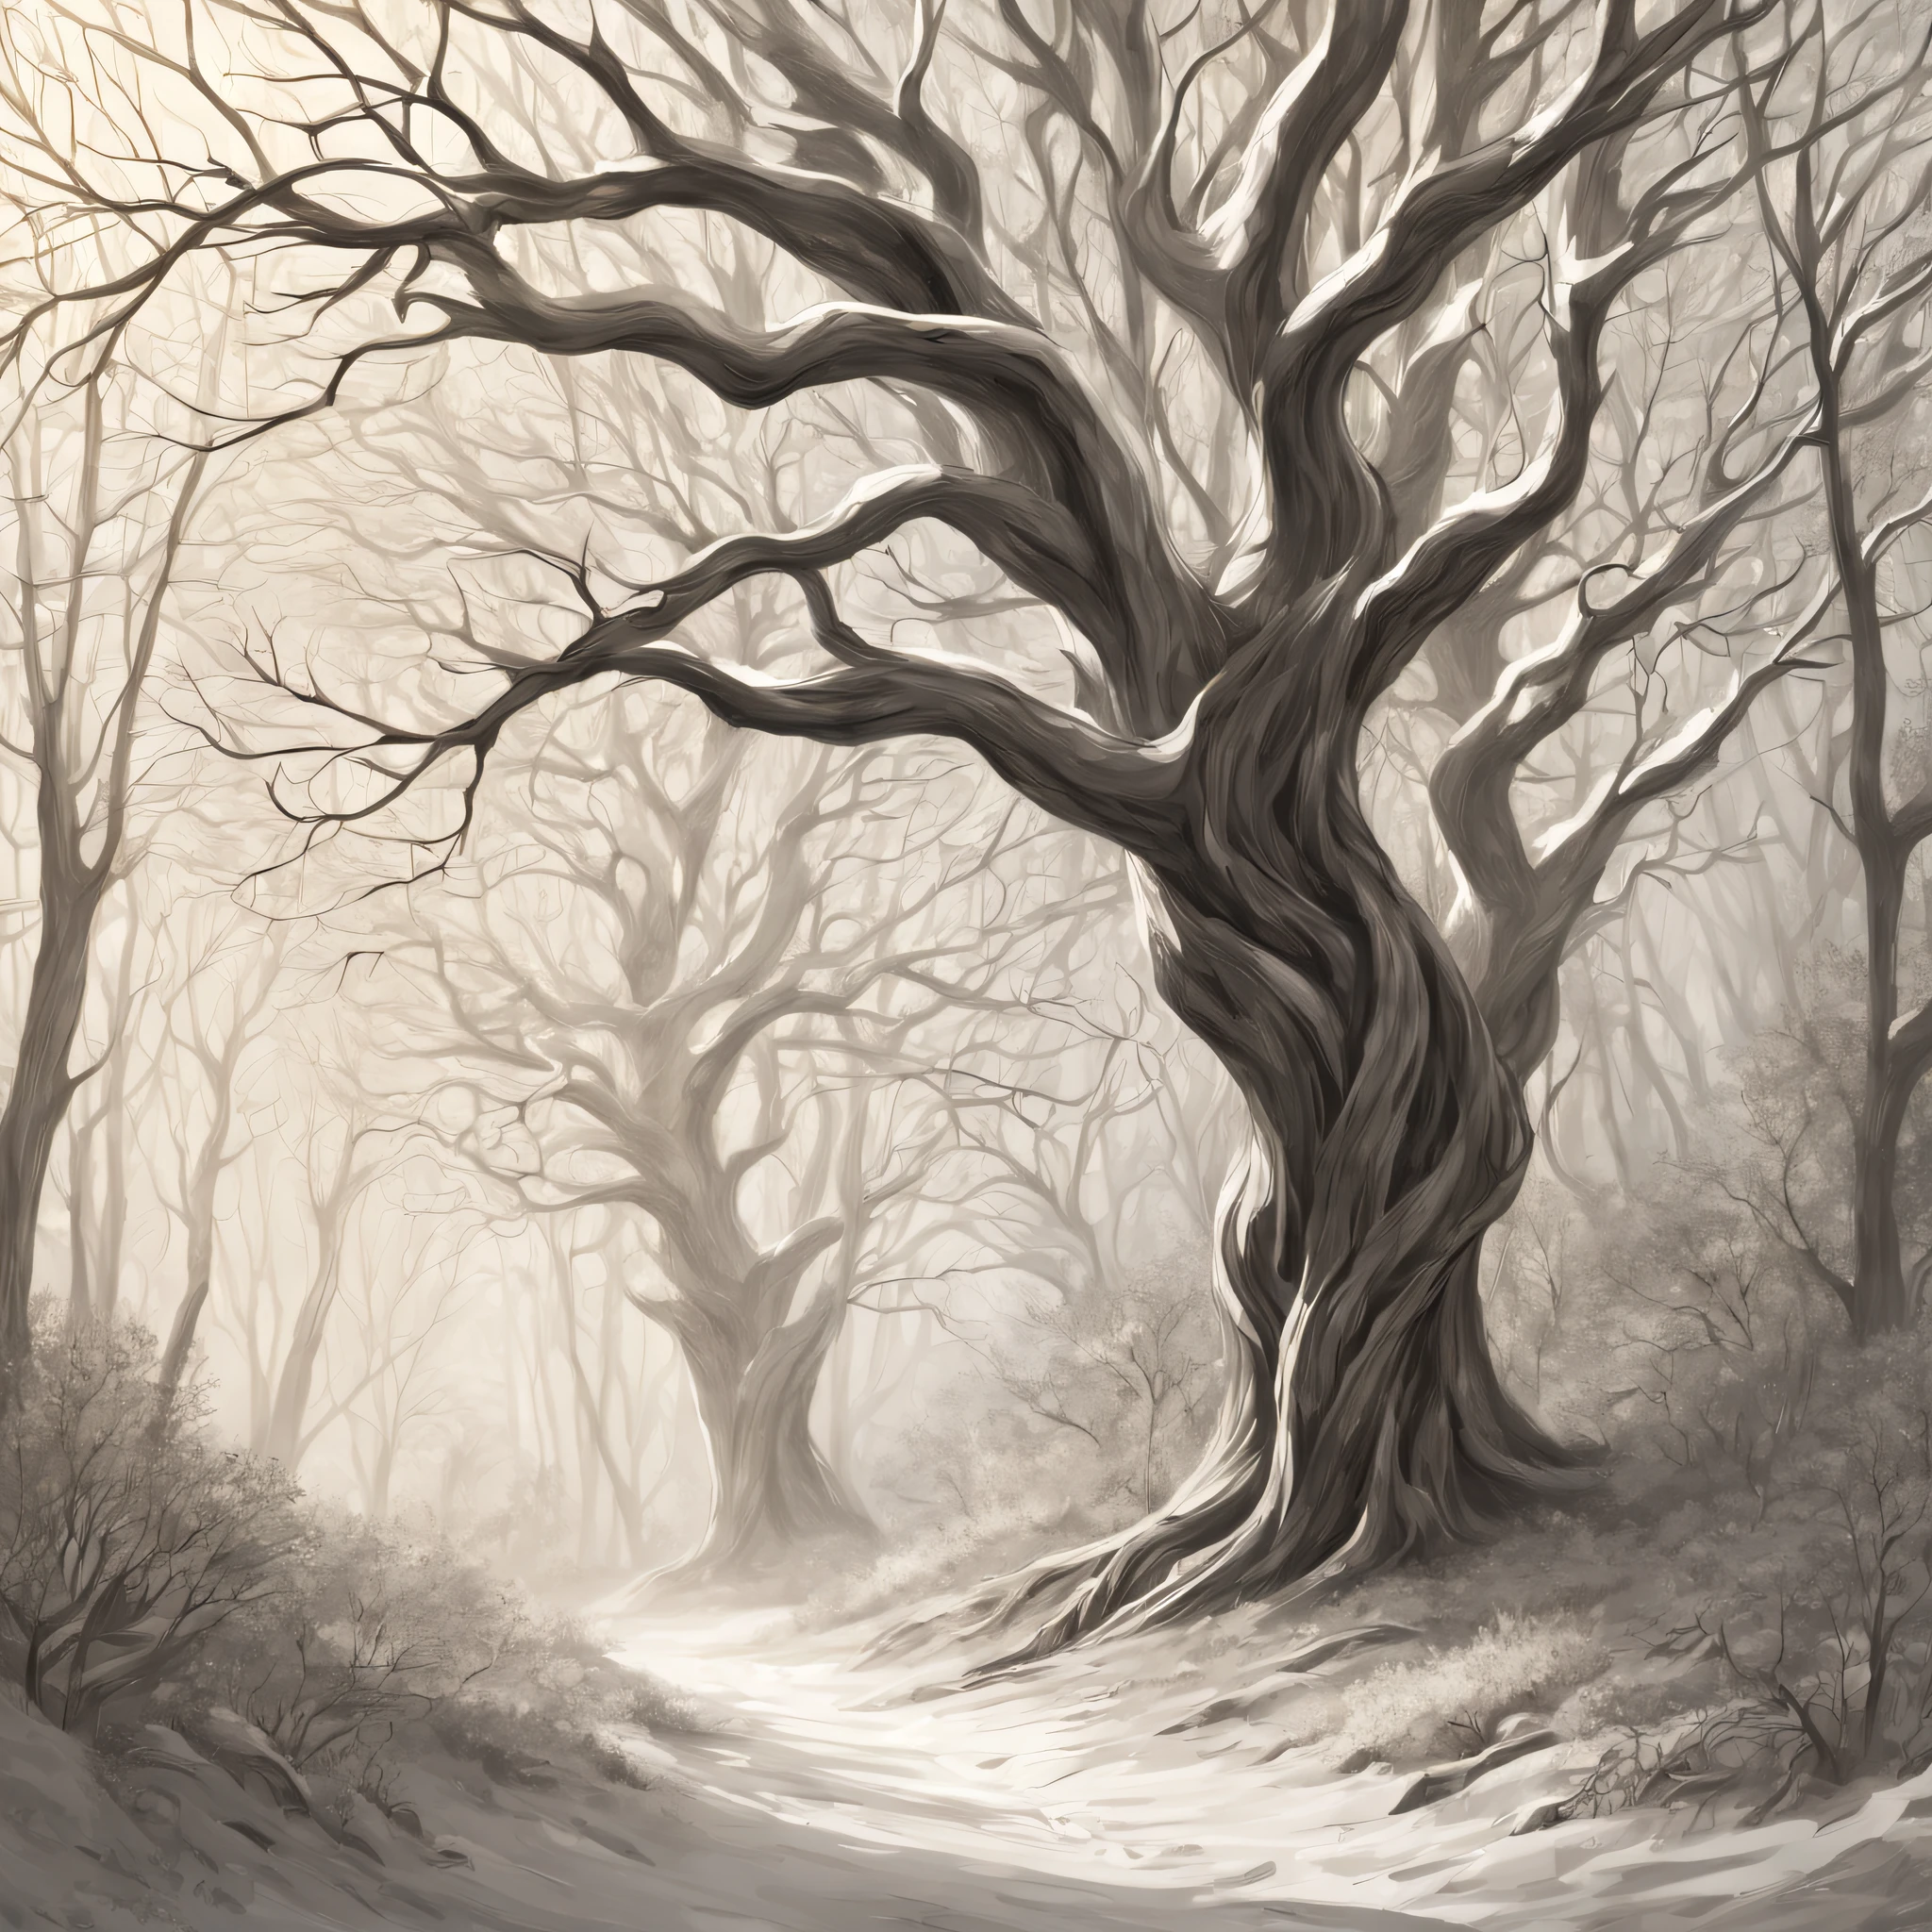 (best quality,4k,8k,highres,masterpiece:1.2),(ultra - detailed)，(realisticlying：1.37).illustratio，(pencil drawing)，at winter season，black andwhite,(ln the forest)，(line art)，organic lines，(crooked branches)，hidden path，(Twisted vines)，(Intertwined tree trunks)，Ethereal atmosphere，game of light and shadow，Subtle gradients、Gradient shadows、Mottled sunlight、tree crown、forest floor、(bark texture)、branch details、(Fine lines)、(stroke technique)、(Sketch-like texture)。Abstract, (Simple vector art), (Hierarchical form).